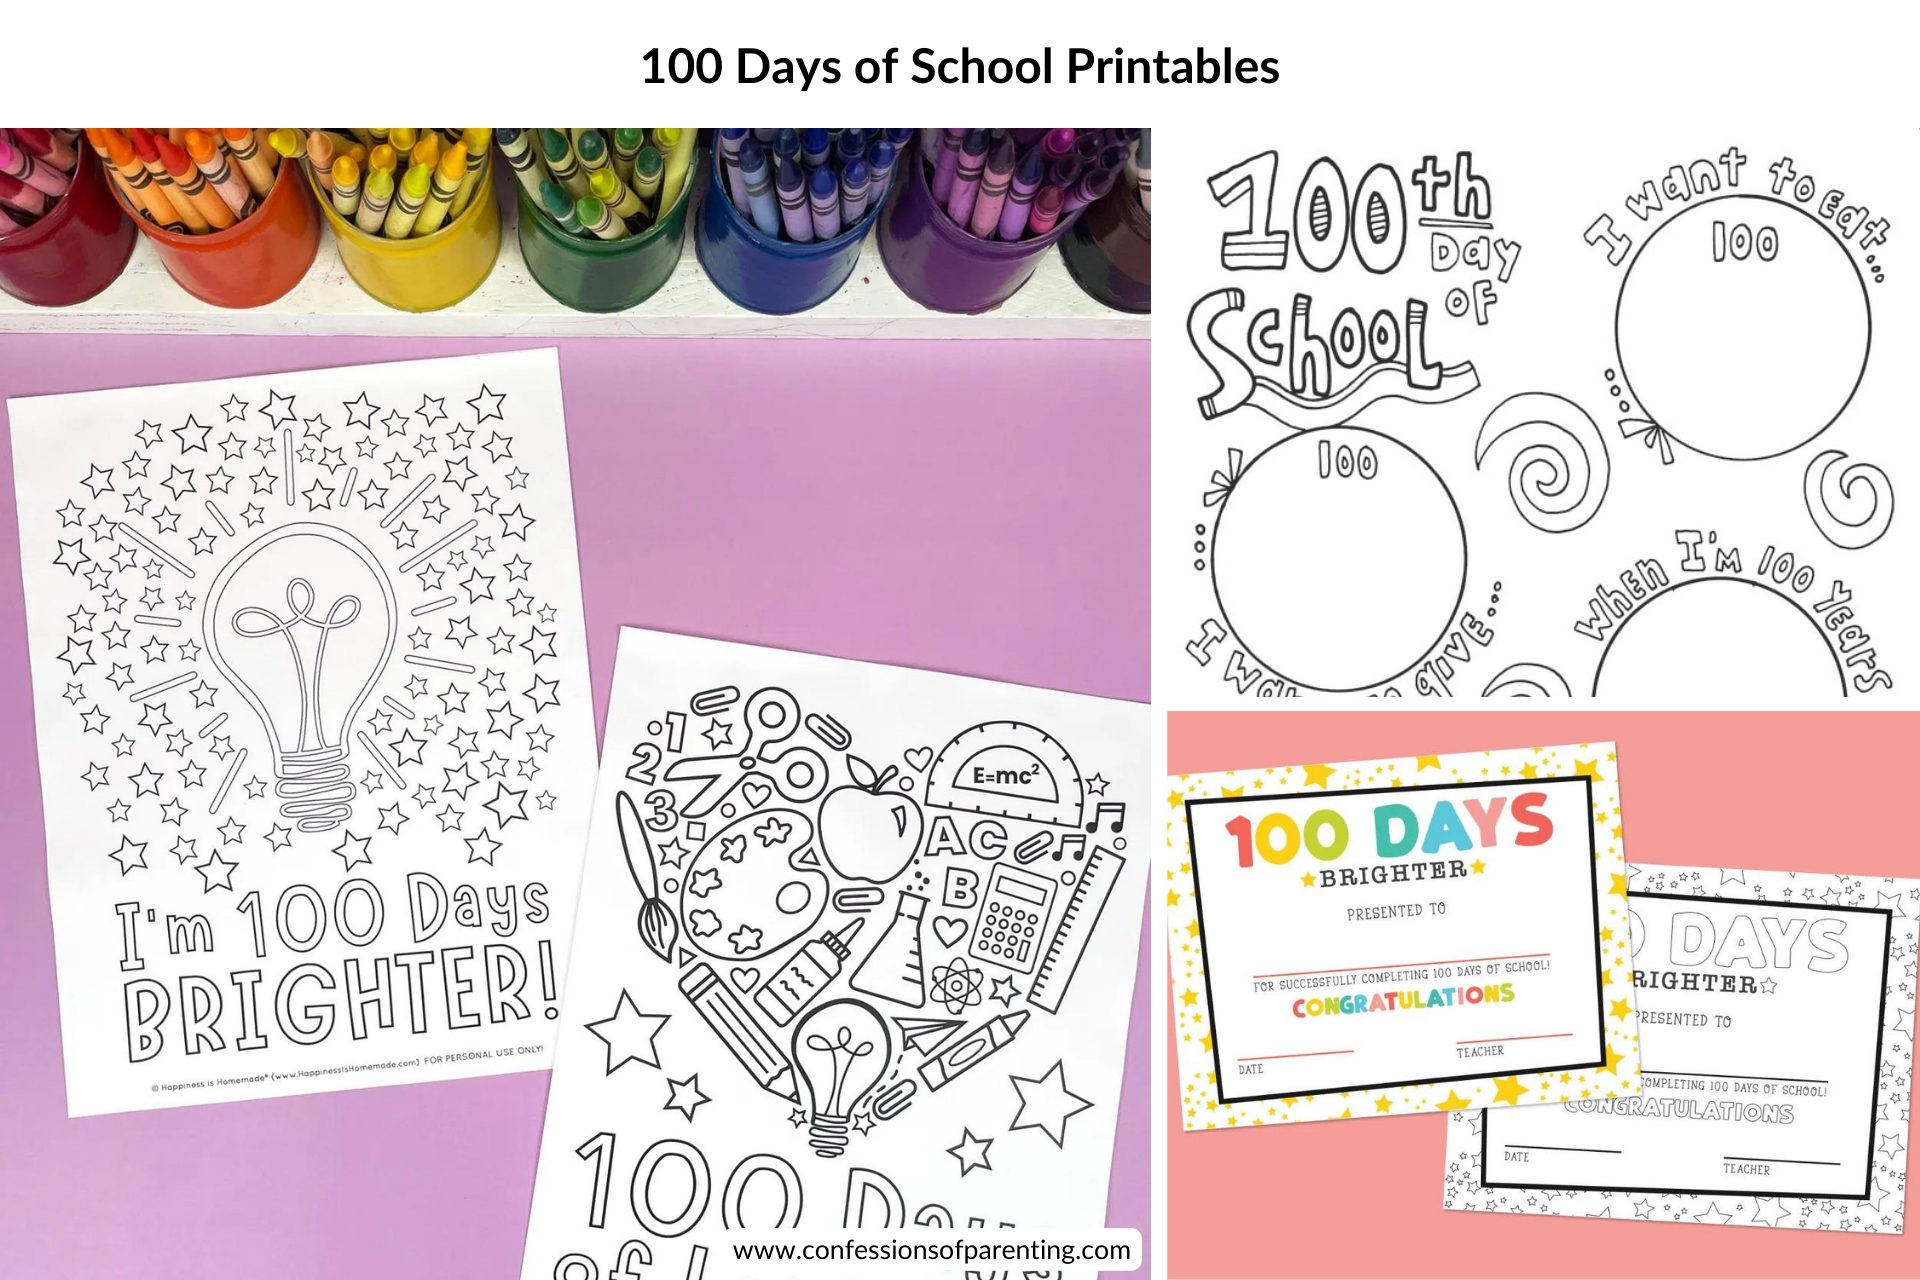 feature image: collage of 100 Days of School Printables